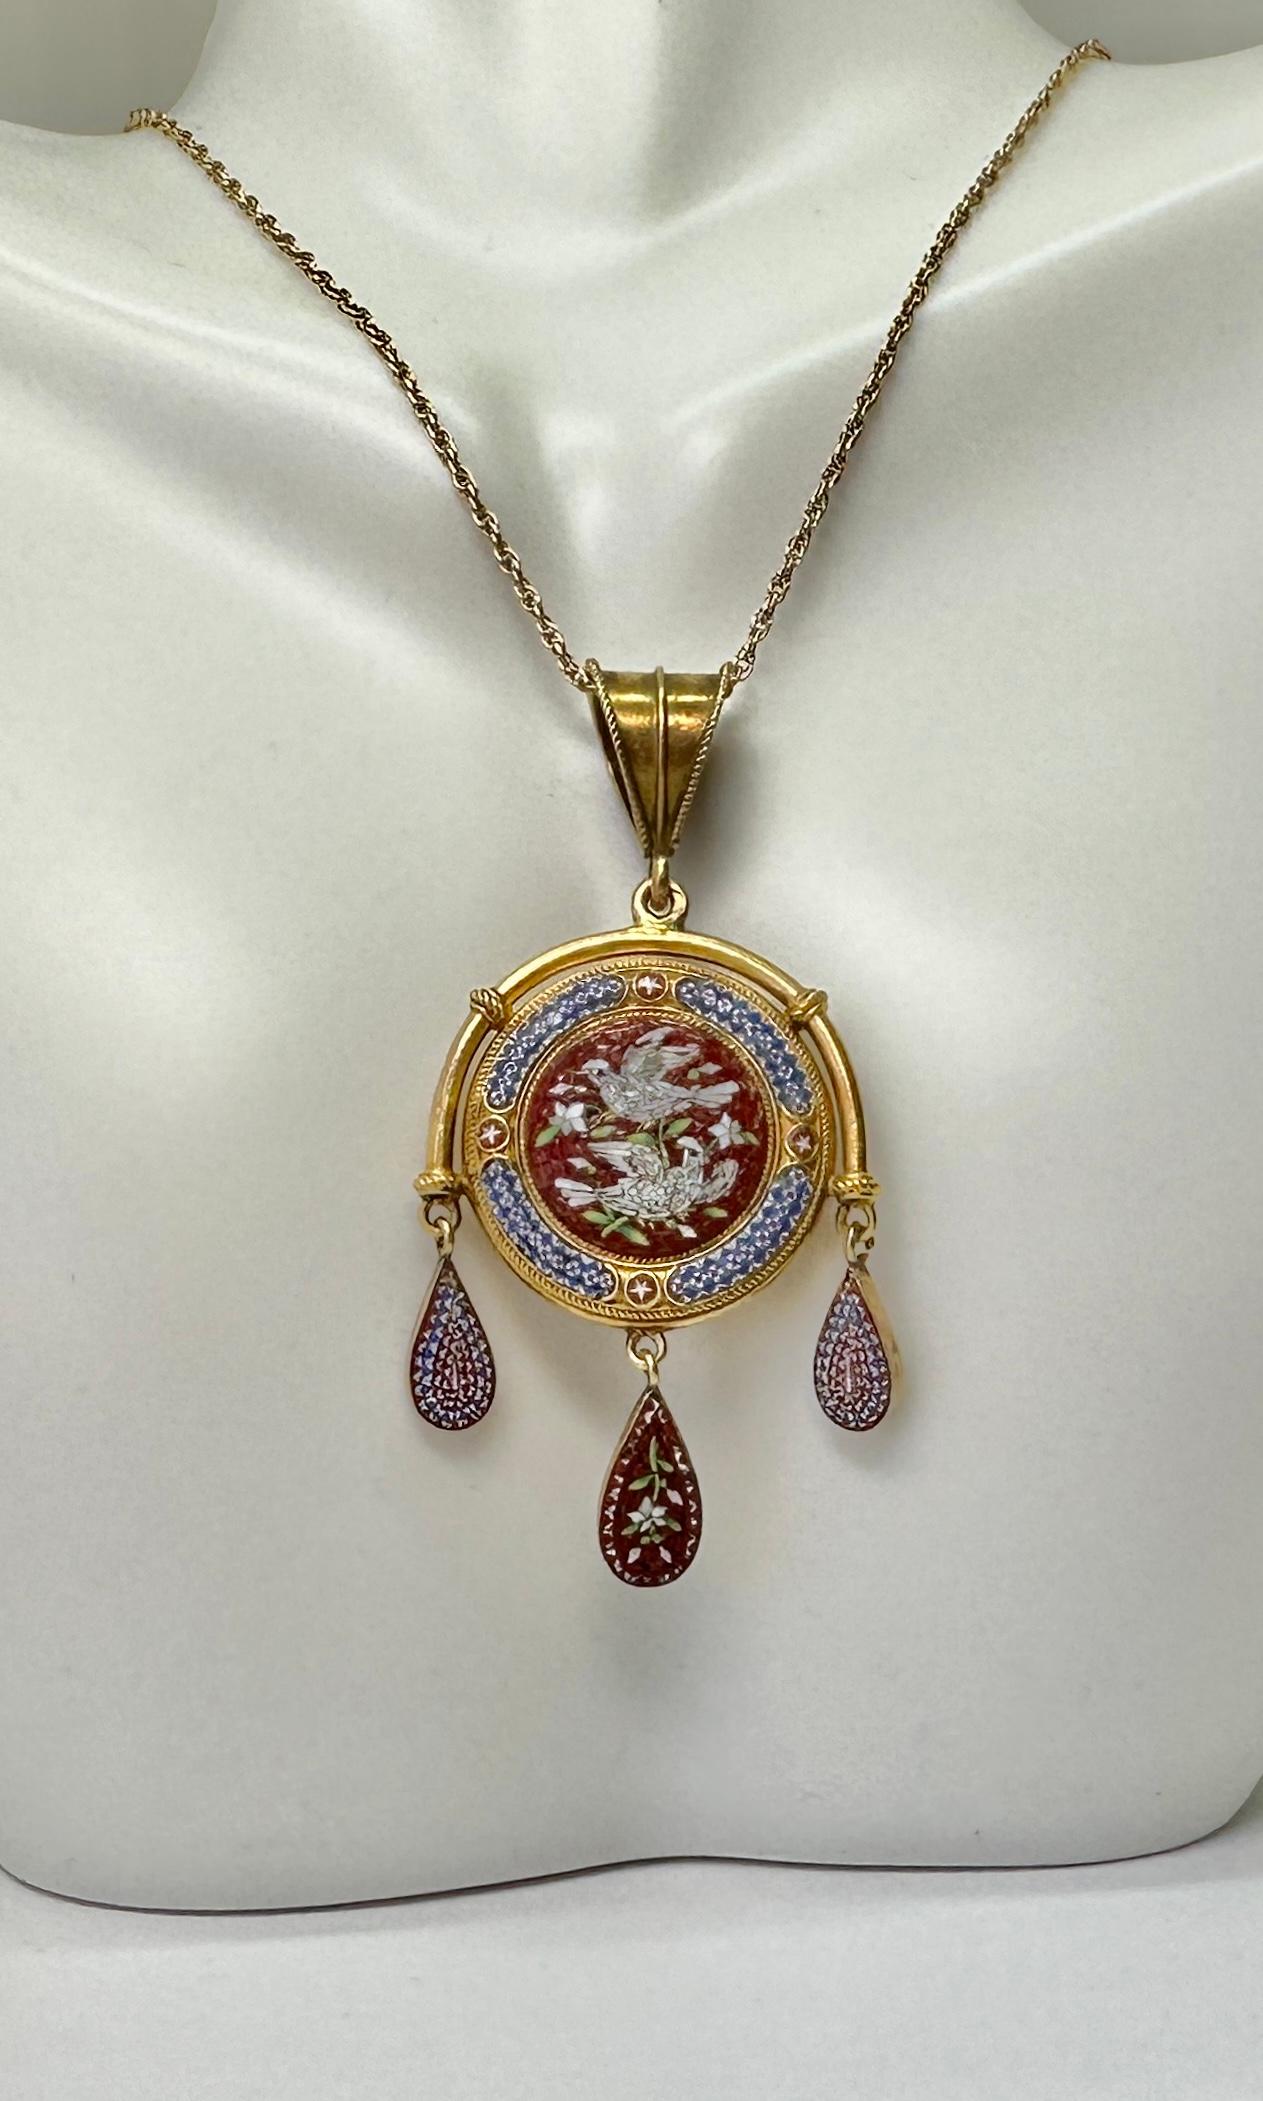 Micromosaic Love Bird Dove Locket Necklace Etruscan Revival Victorian 14k Gold For Sale 1